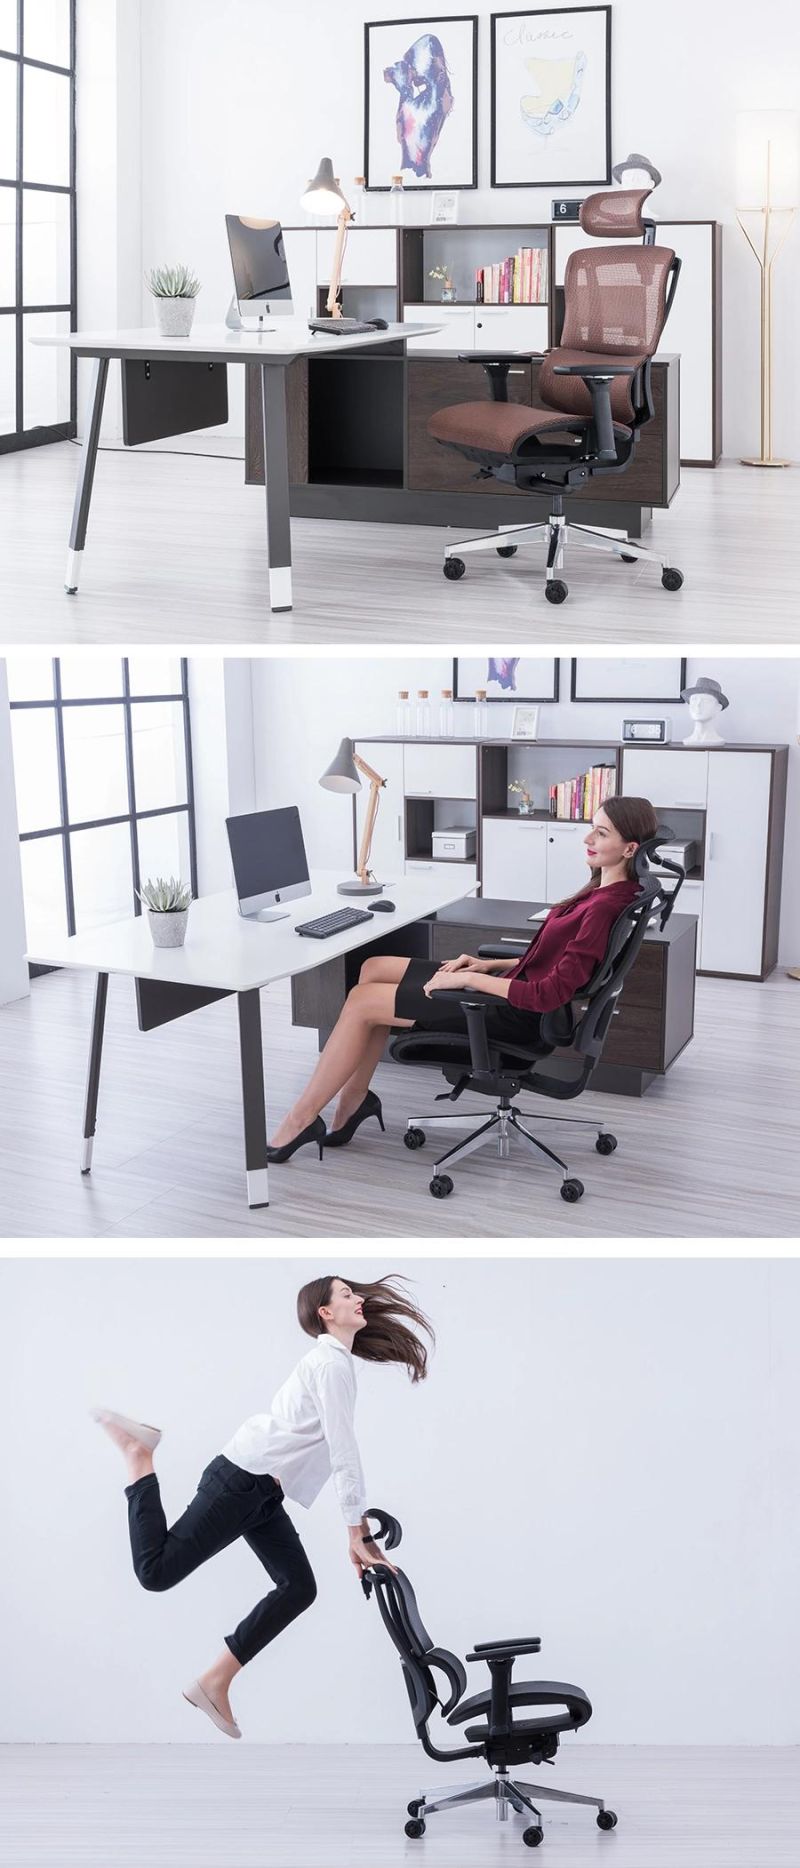 Expensive Office Chair for Boss or CEO Office Room